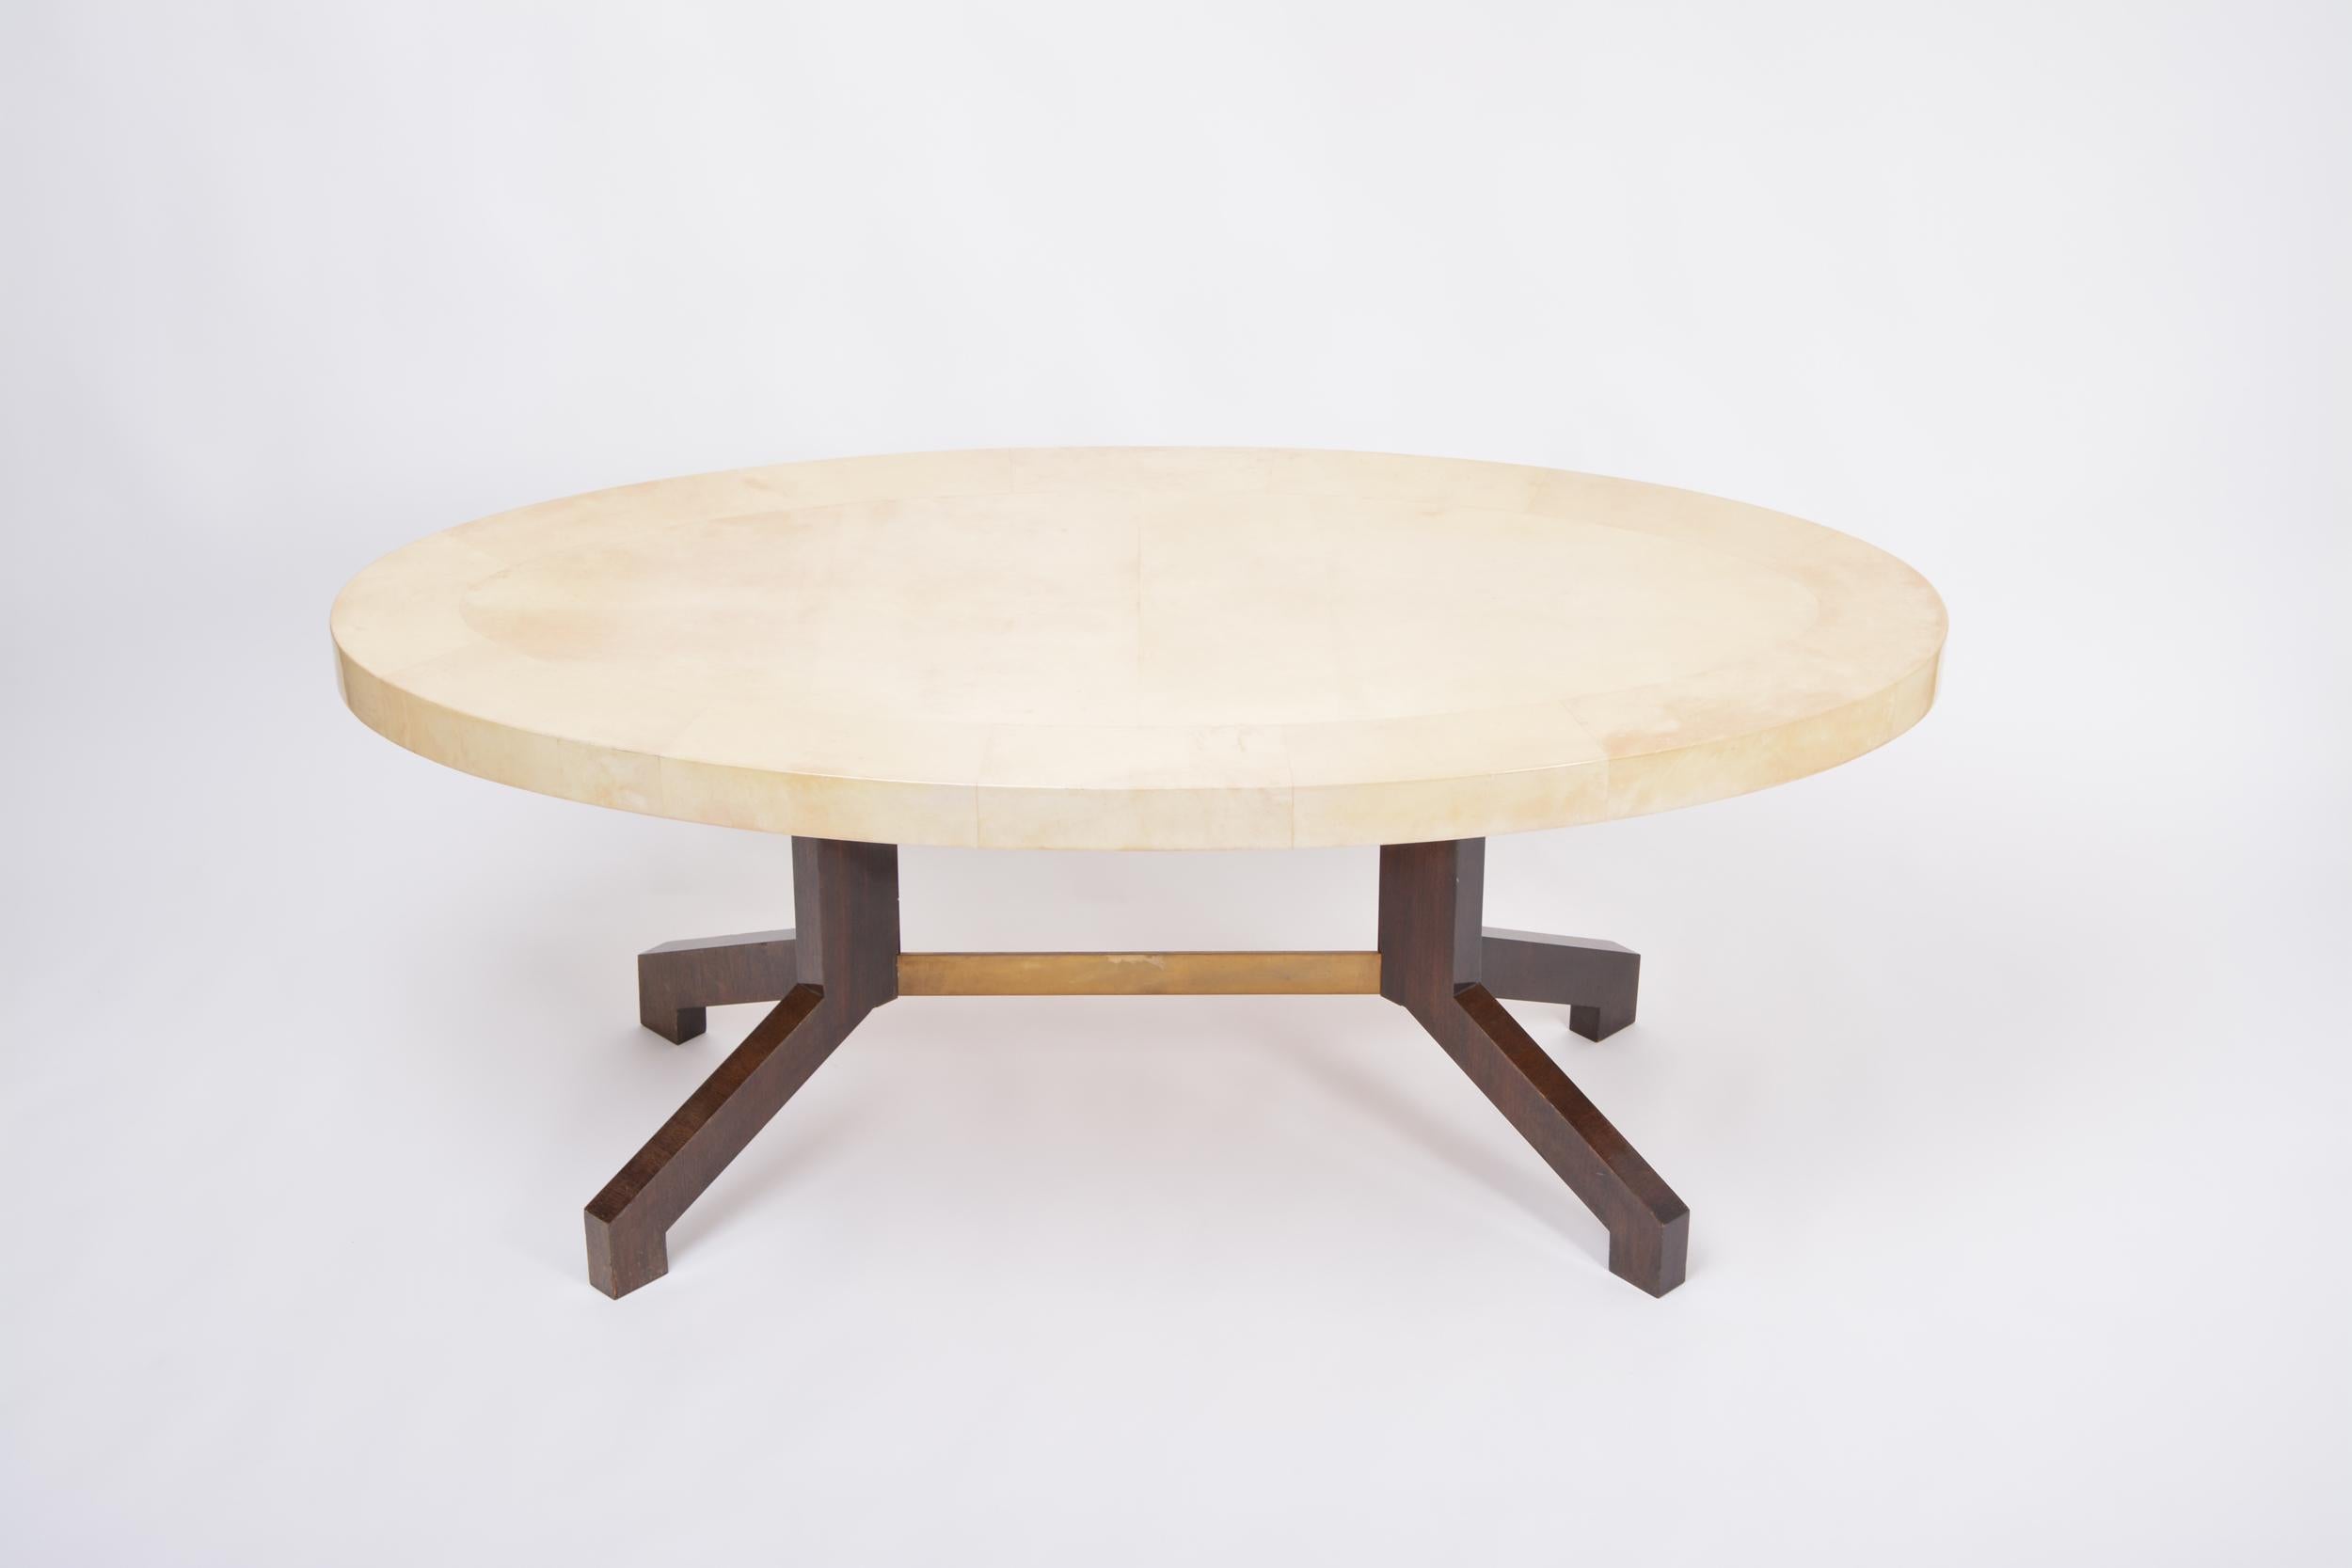 Oval dining table designed by Aldo Tura and produced in Italy in the 1970s. This dining table is a very strong example of his work, simple in form, with a soft curved oval top affixed to two mahogany feet connected with a metal bar. The ethereal